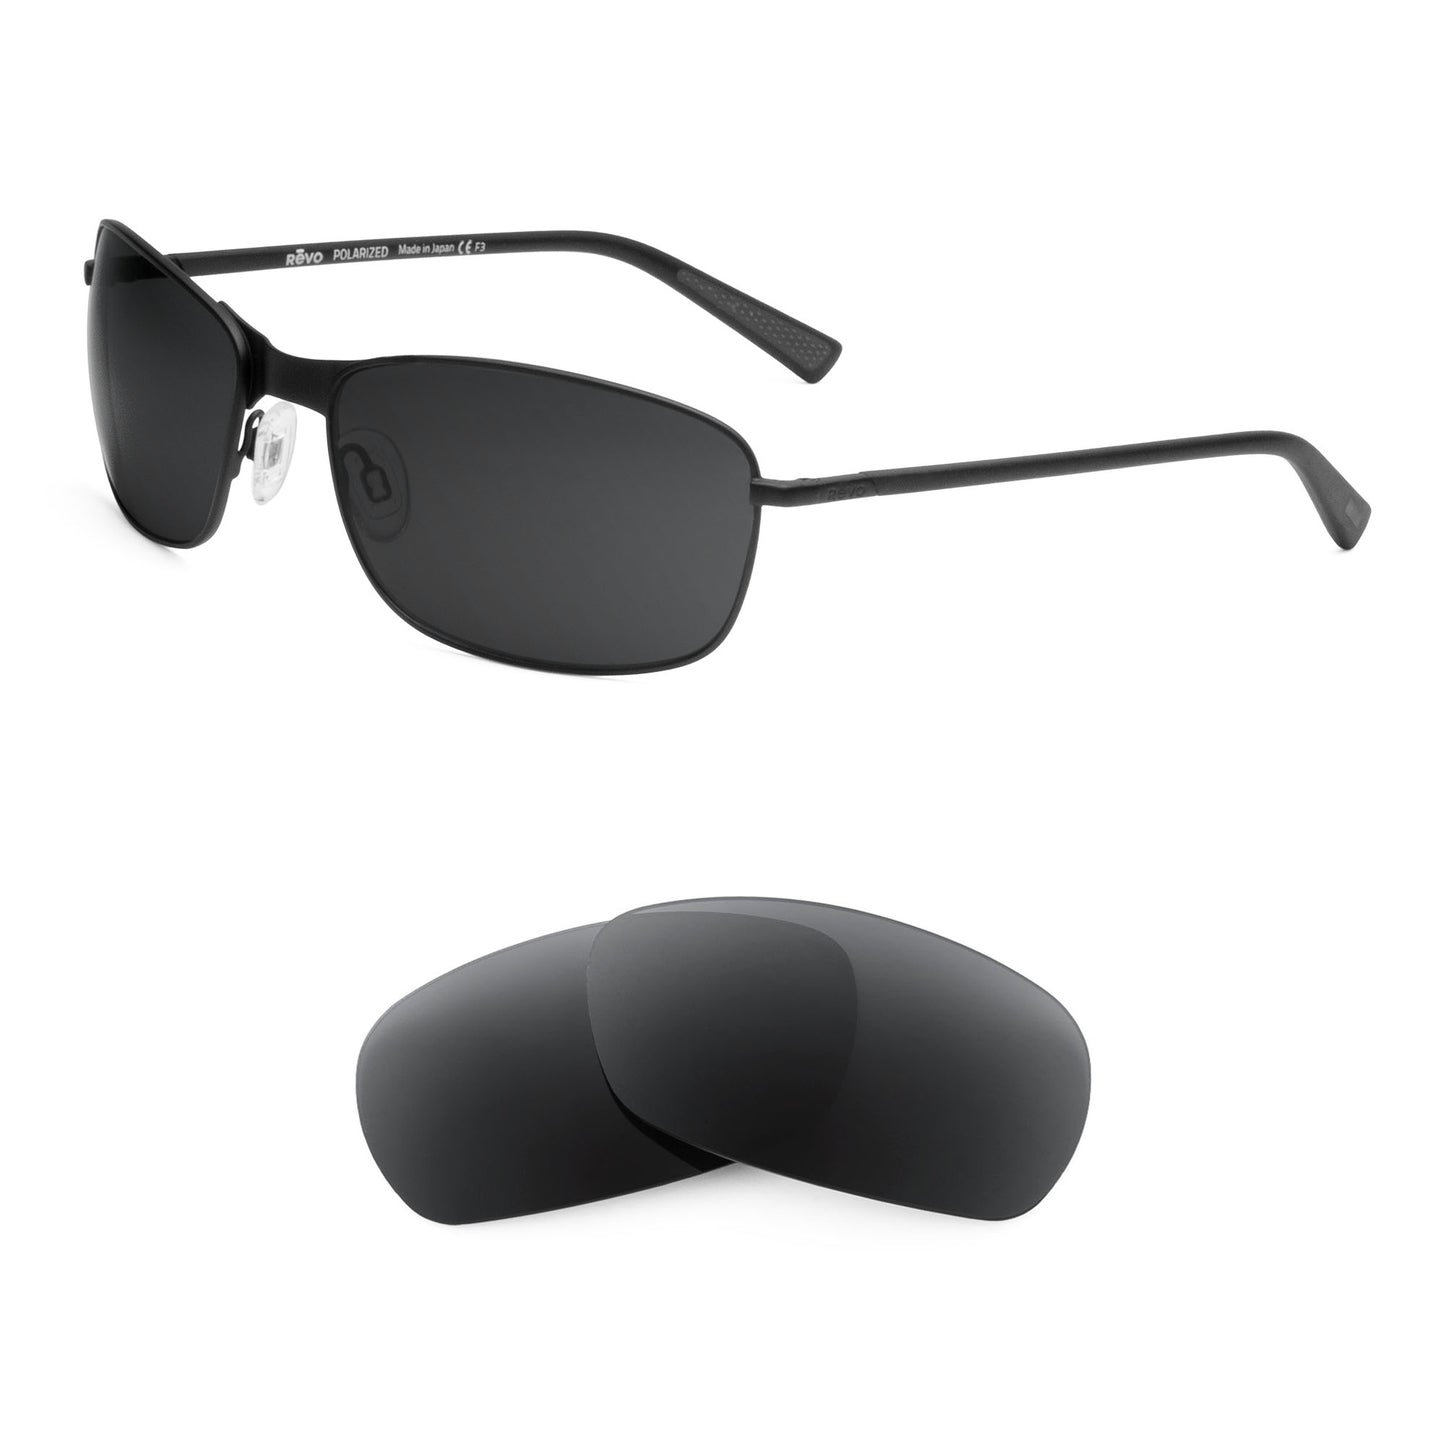 Revo Decoy sunglasses with replacement lenses